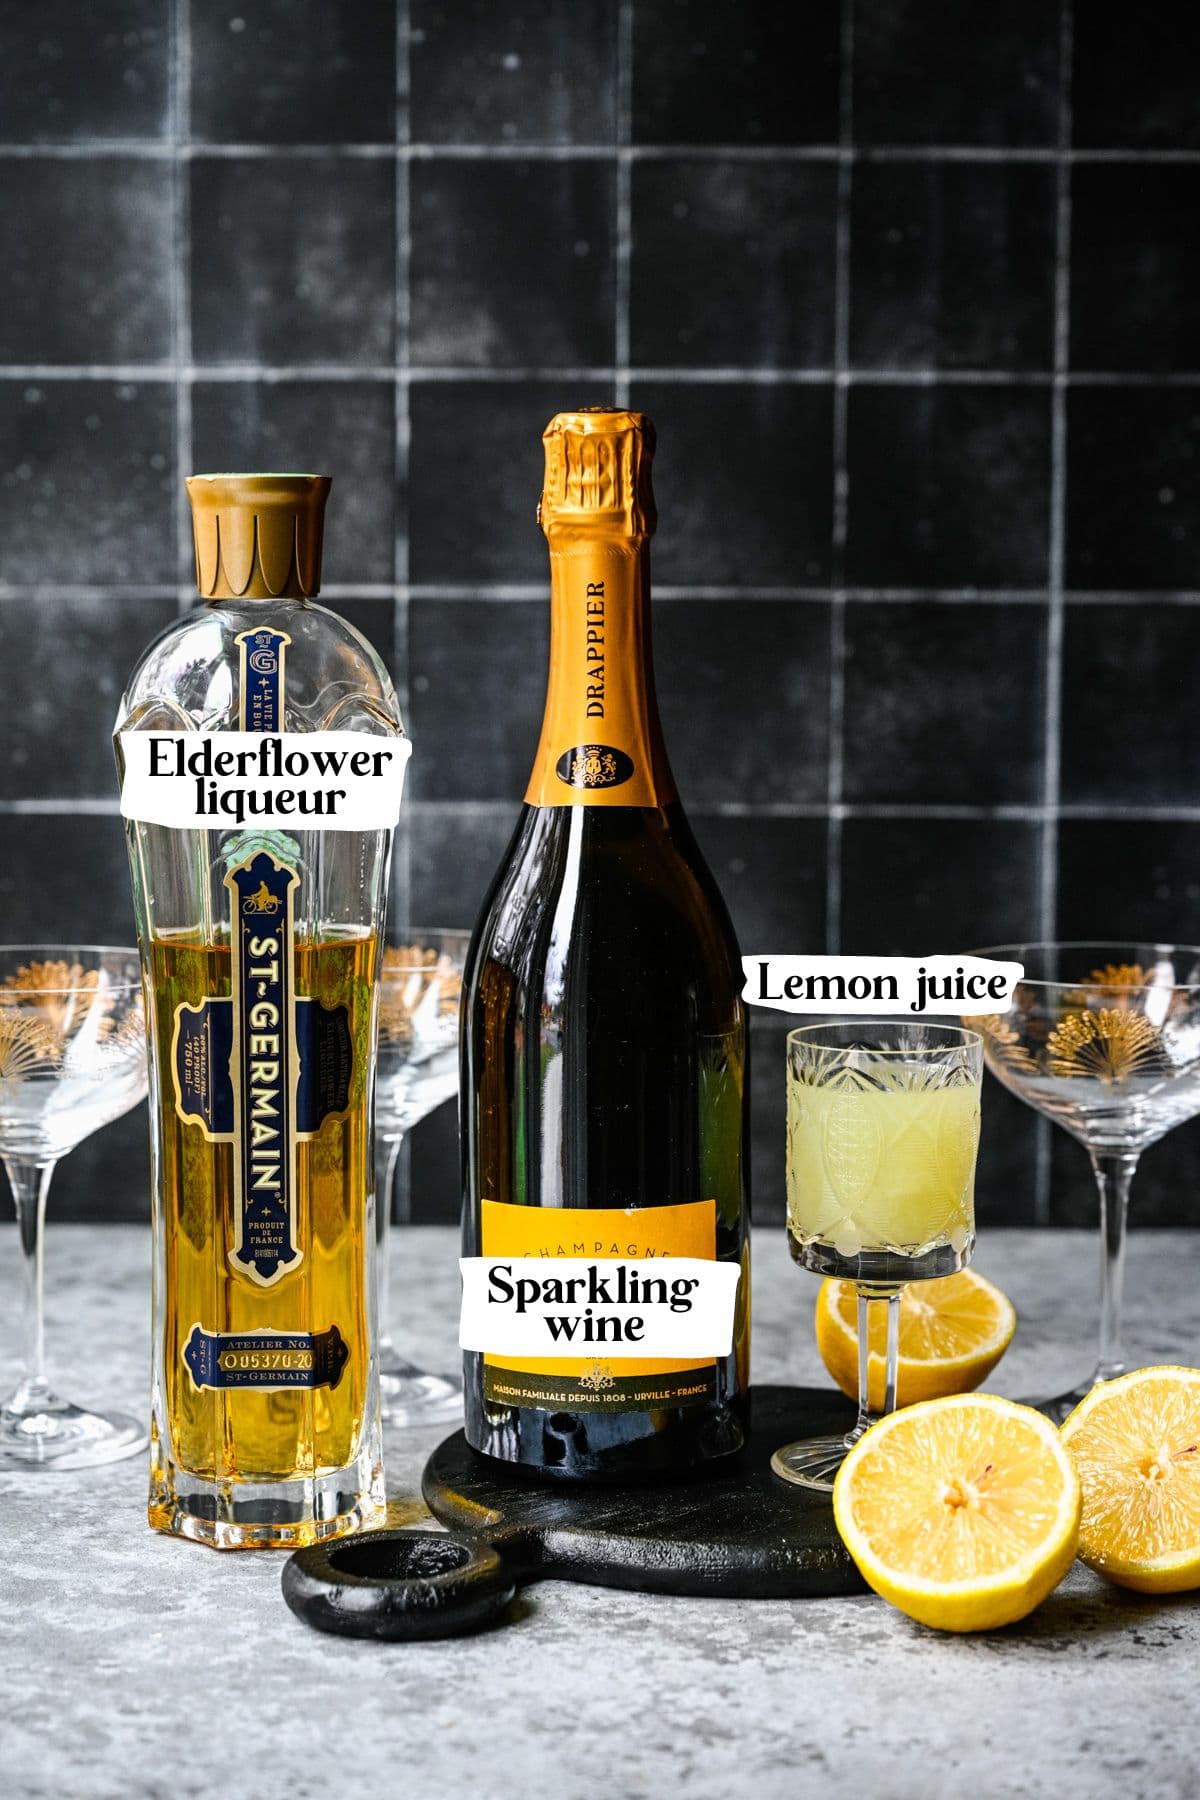 French 77 ingredients including sparkling wine and lemon juice.